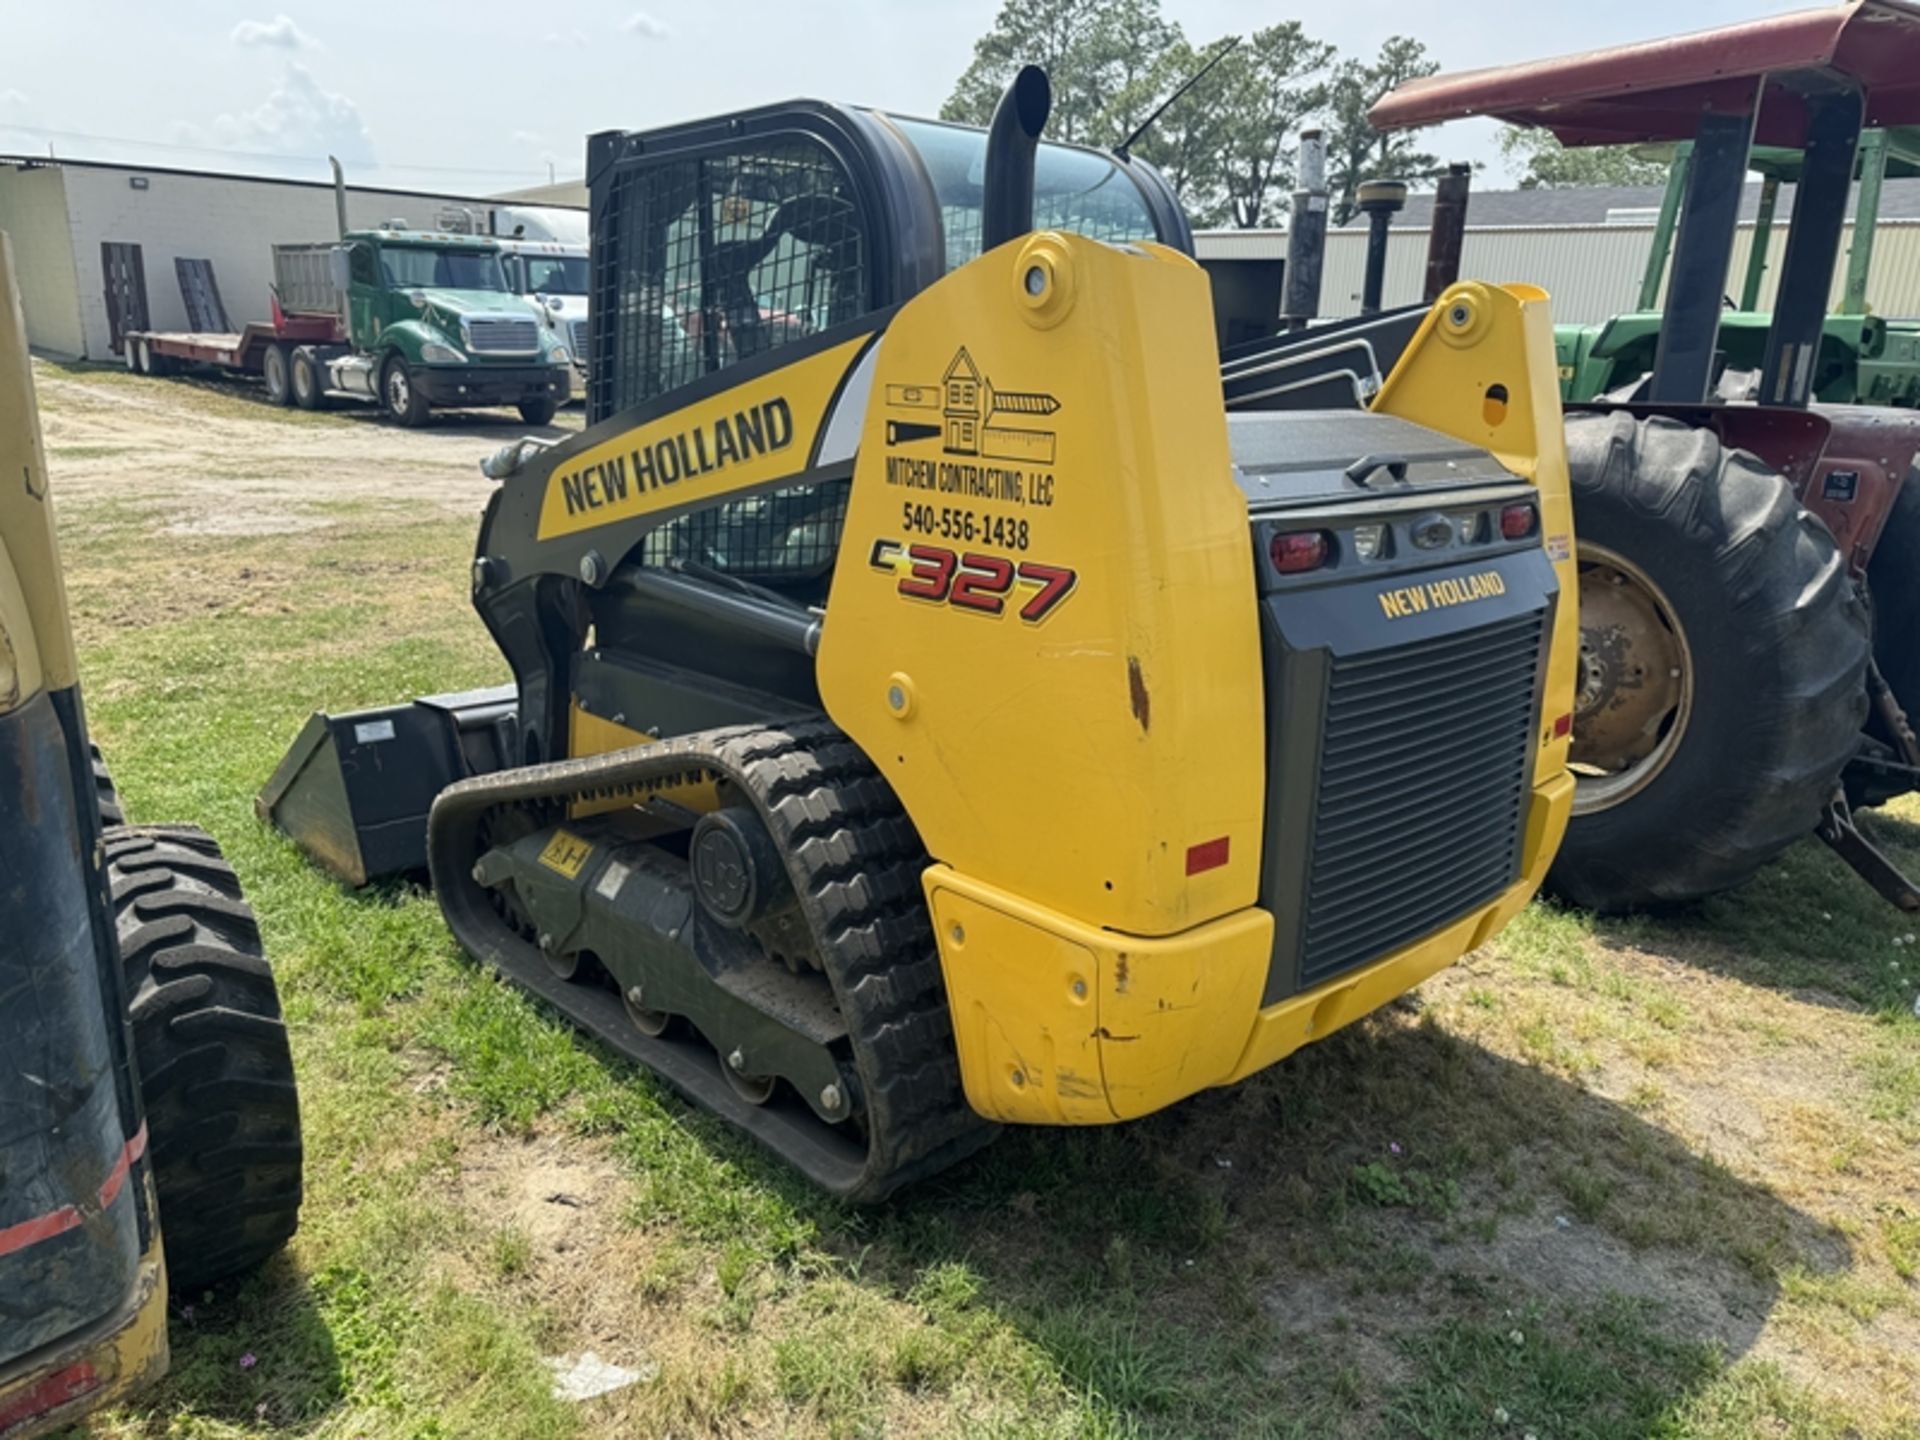 2022 NEW HOLLAND C327 track skid steer, cab – 156 hours showing - JAF0C327TNM422705 - Image 4 of 4